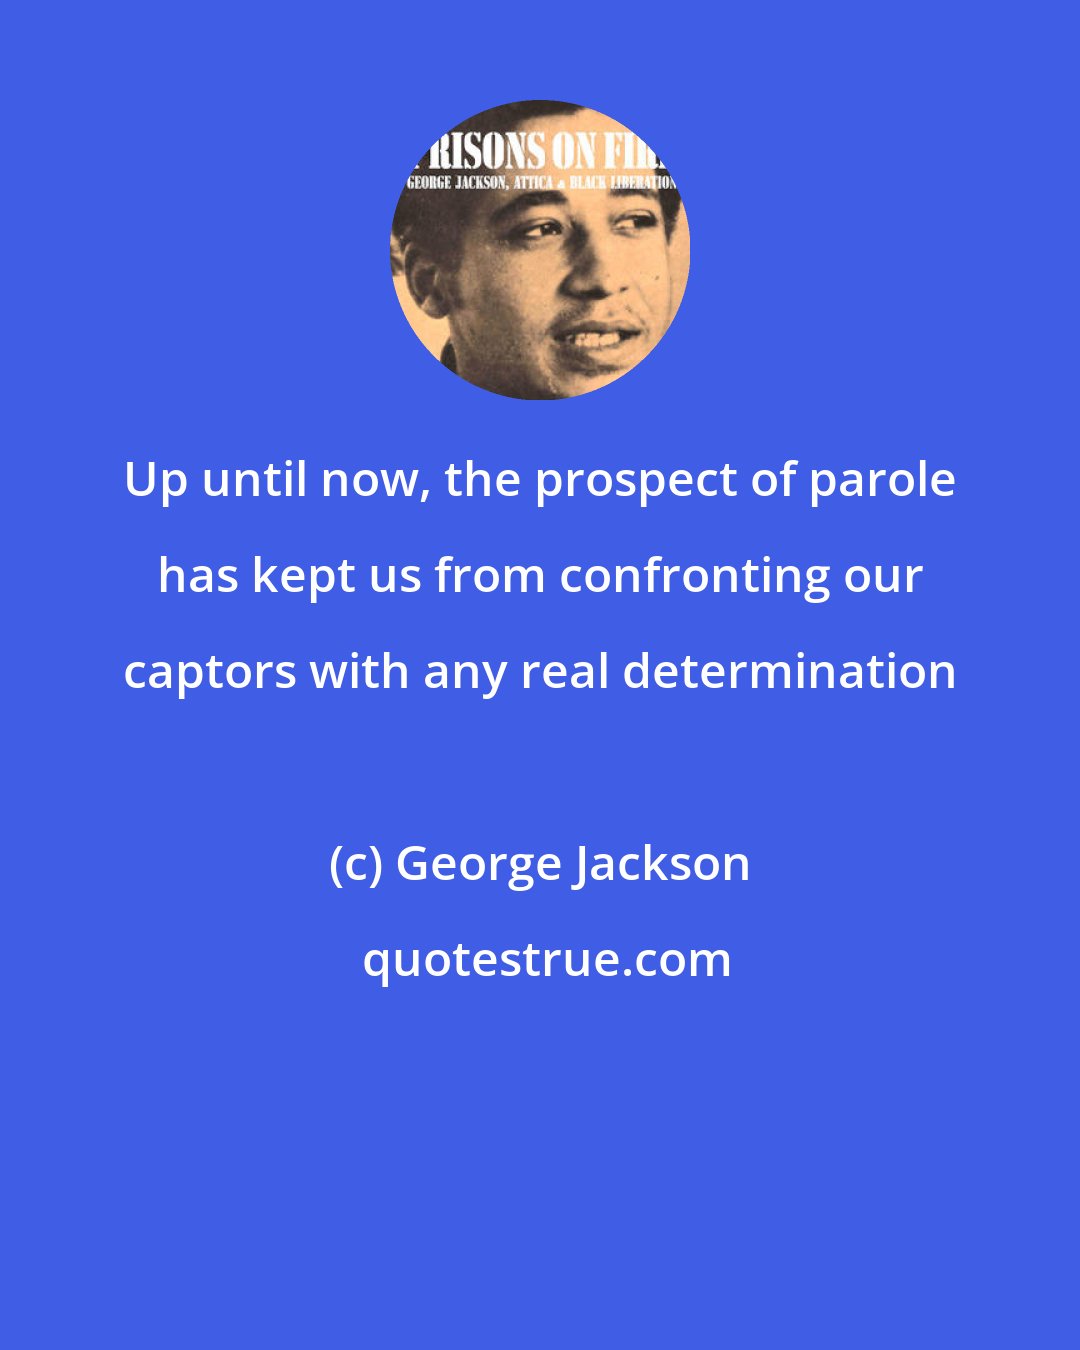 George Jackson: Up until now, the prospect of parole has kept us from confronting our captors with any real determination